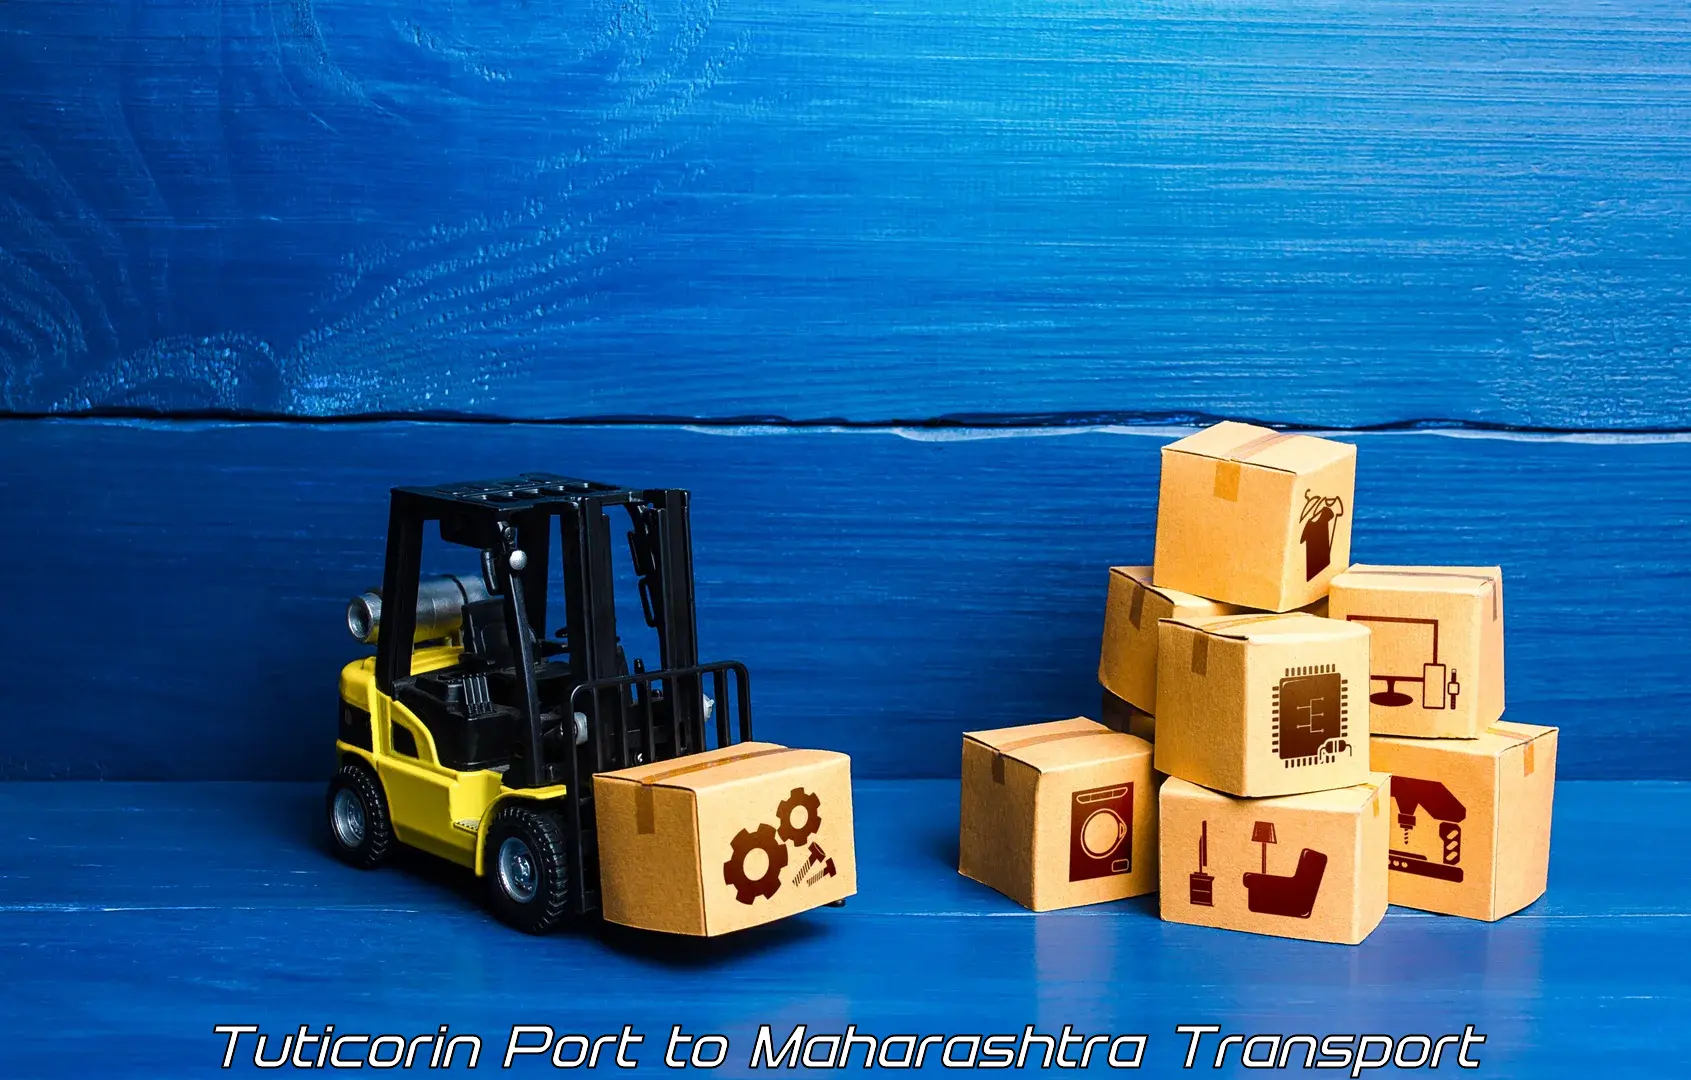 Vehicle courier services Tuticorin Port to Andheri